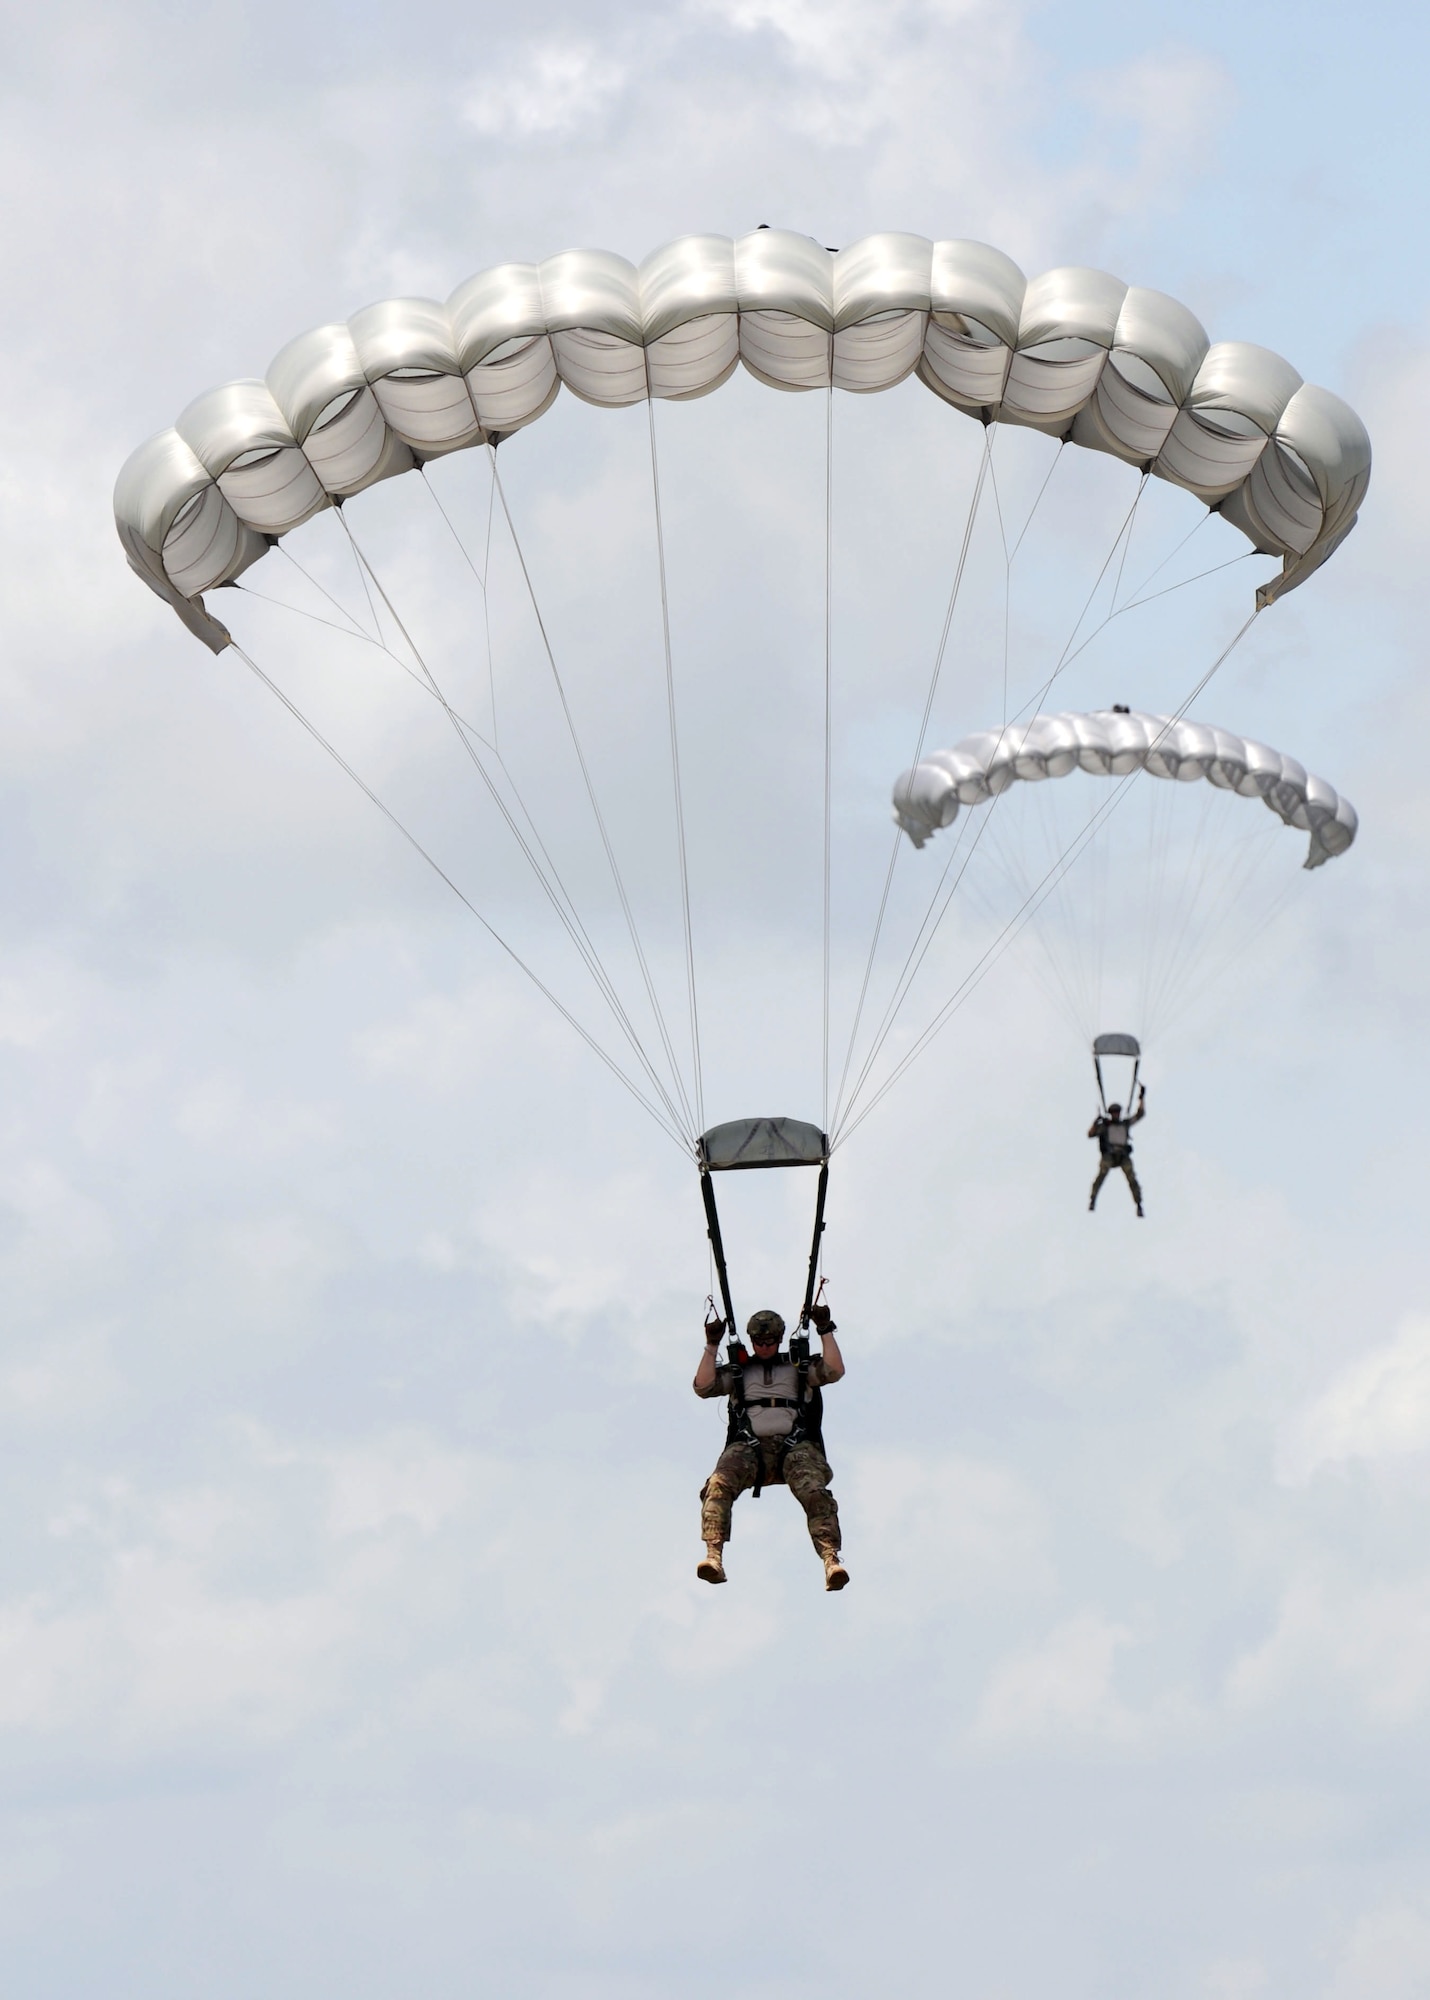 Special Tactics Airmen from the 720th Special Tactics Group, Hurlburt Field, Fla., complete a successful parachute landing on the flight line during a free fall training exercise July 28, 2016, on Keesler Air Force Base, Miss. The Air Force's special operations ground force uses freefall as an infiltration method to access areas where aircraft cannot land. (U.S. Air Force photo by Kemberly Groue/Released)
